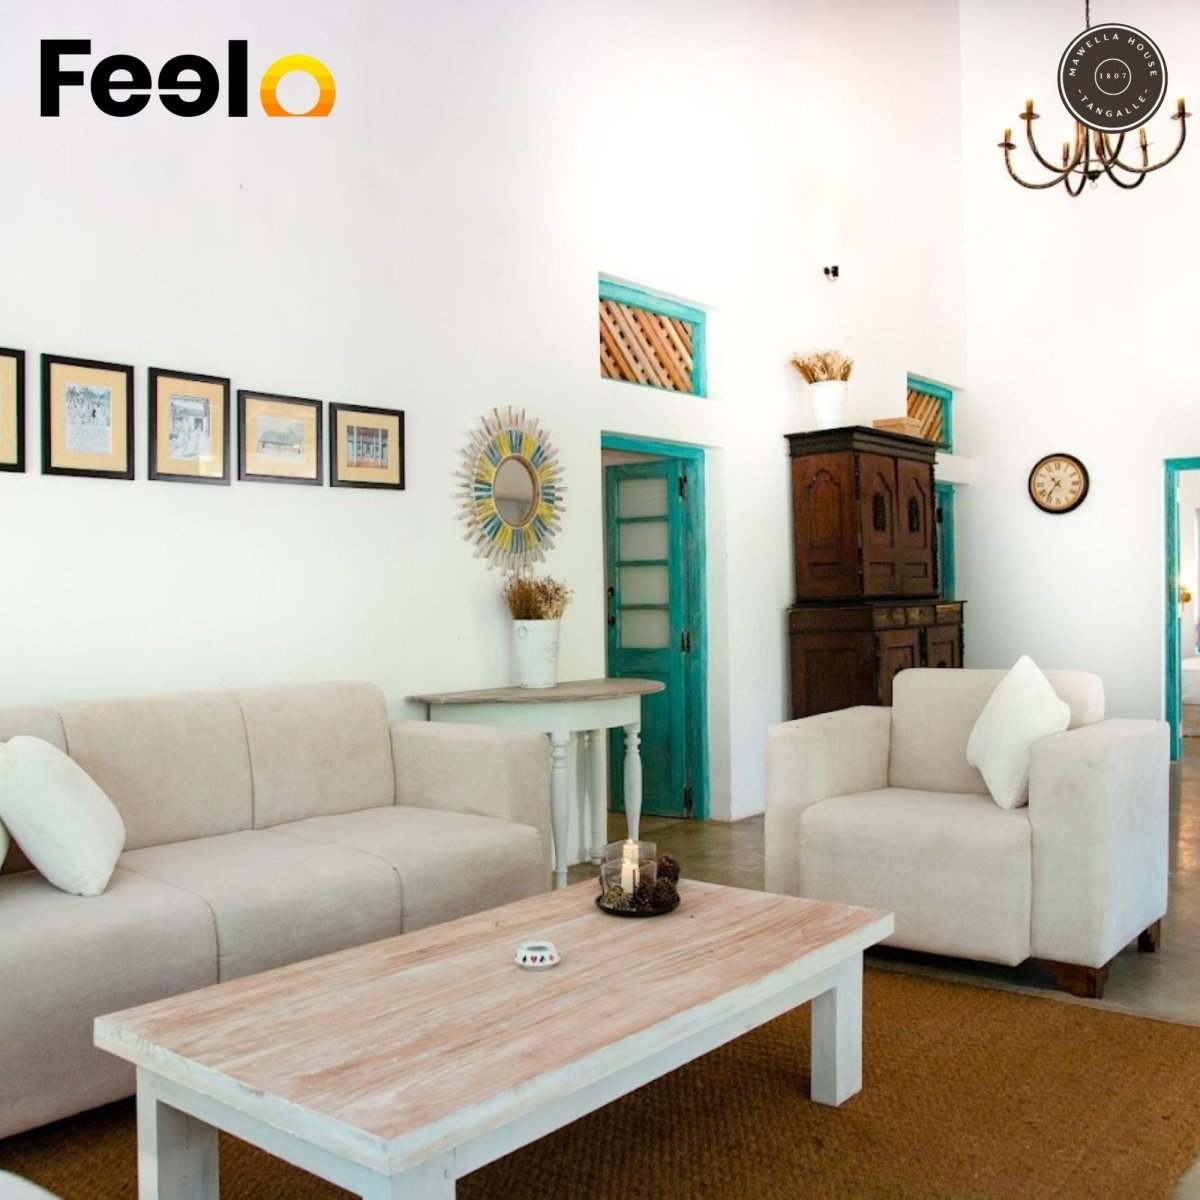 1x Night stay at a Colonial Villa near Mawella Beach for 2 people - Mawella House 1807, Tangalle | Feelo